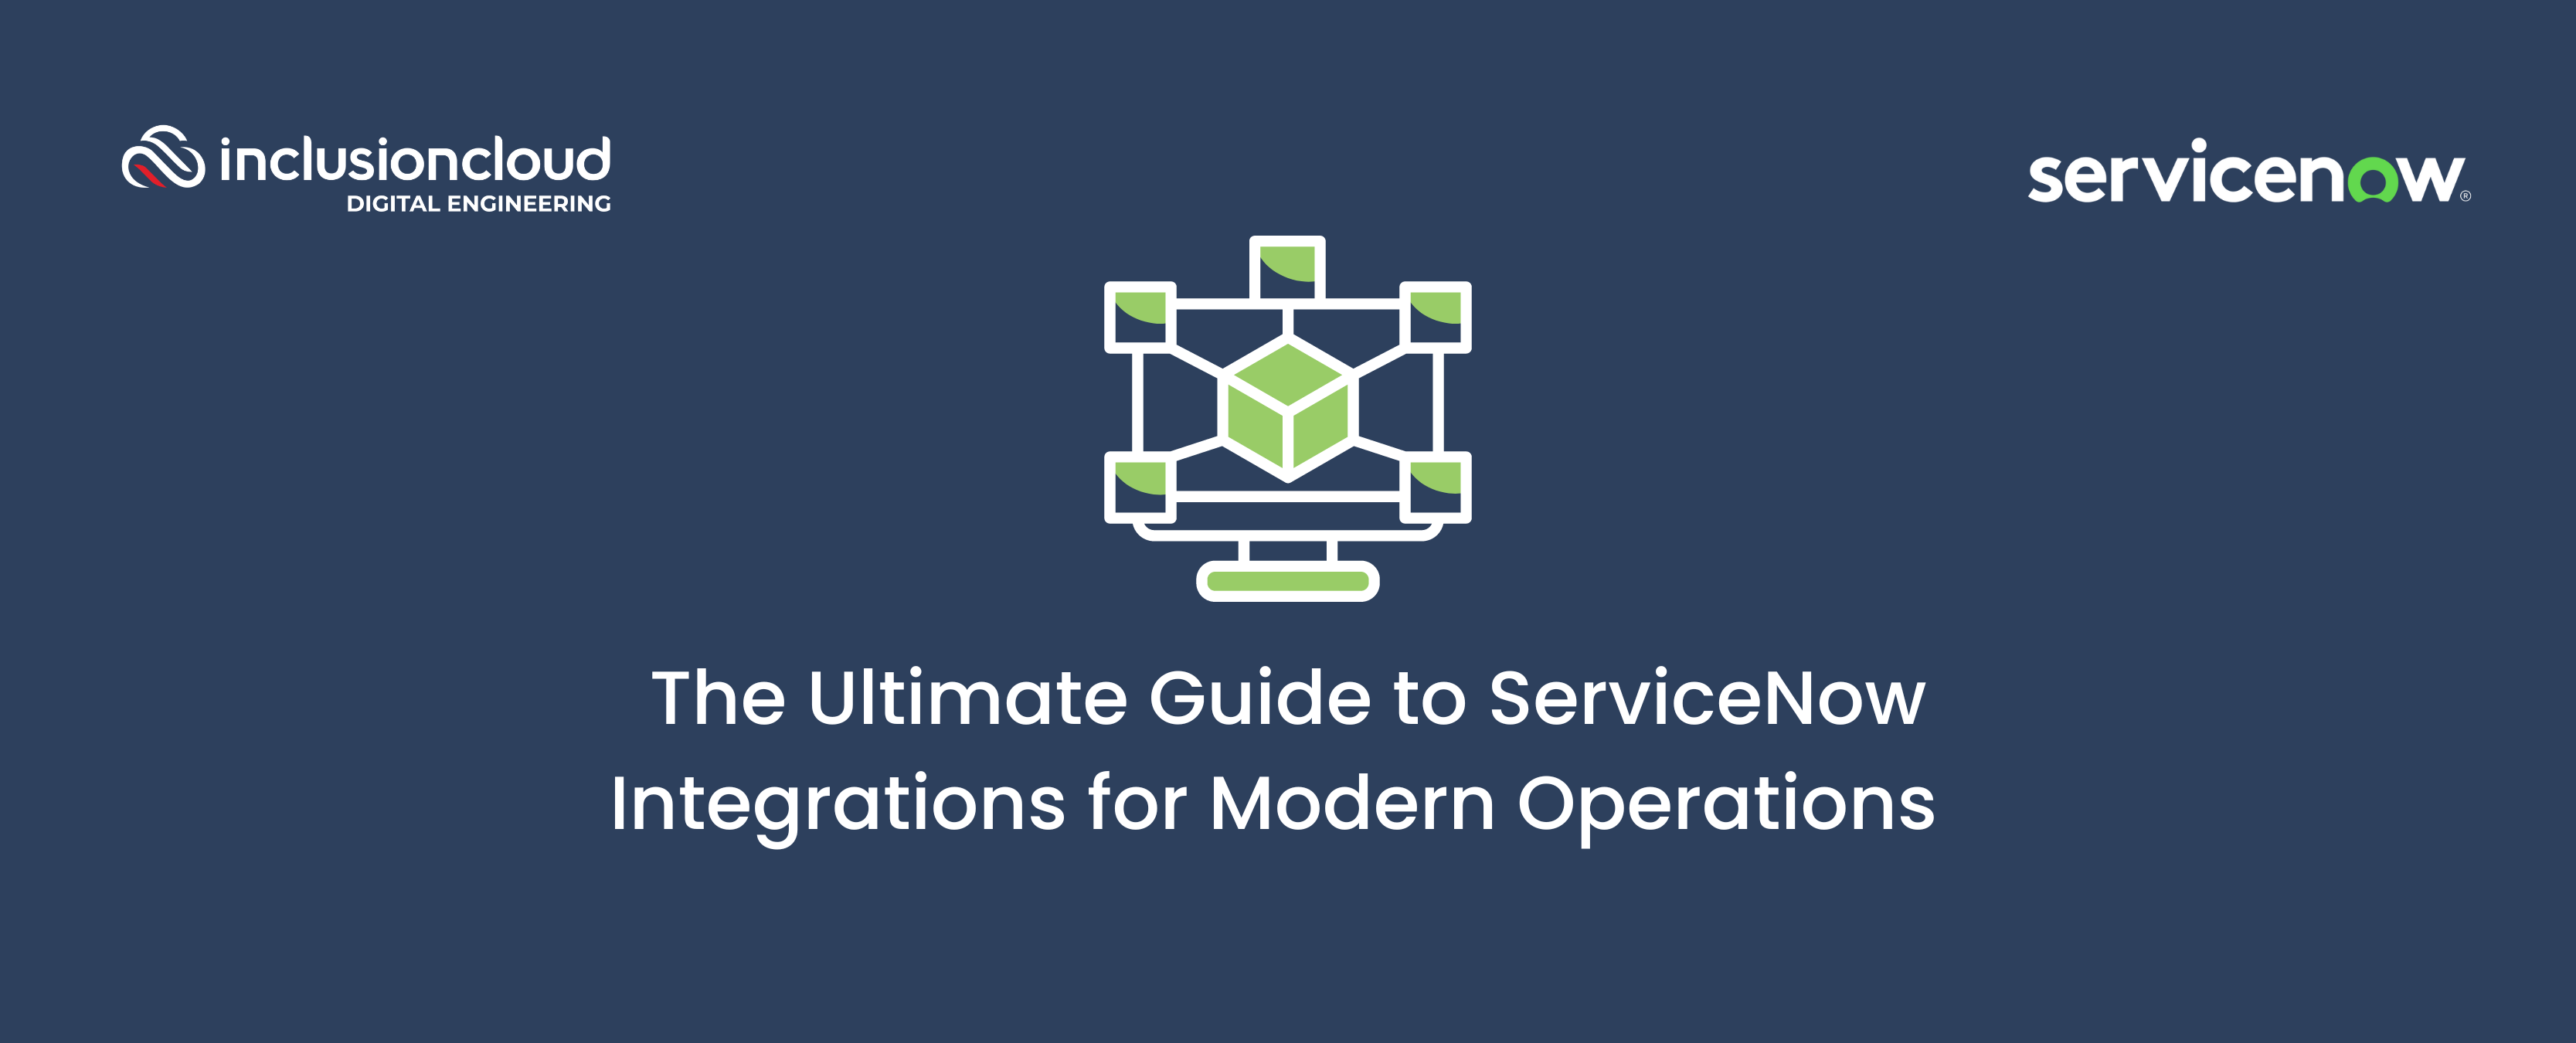 The Ultimate Guide to ServiceNow Integrations for Modern Operations